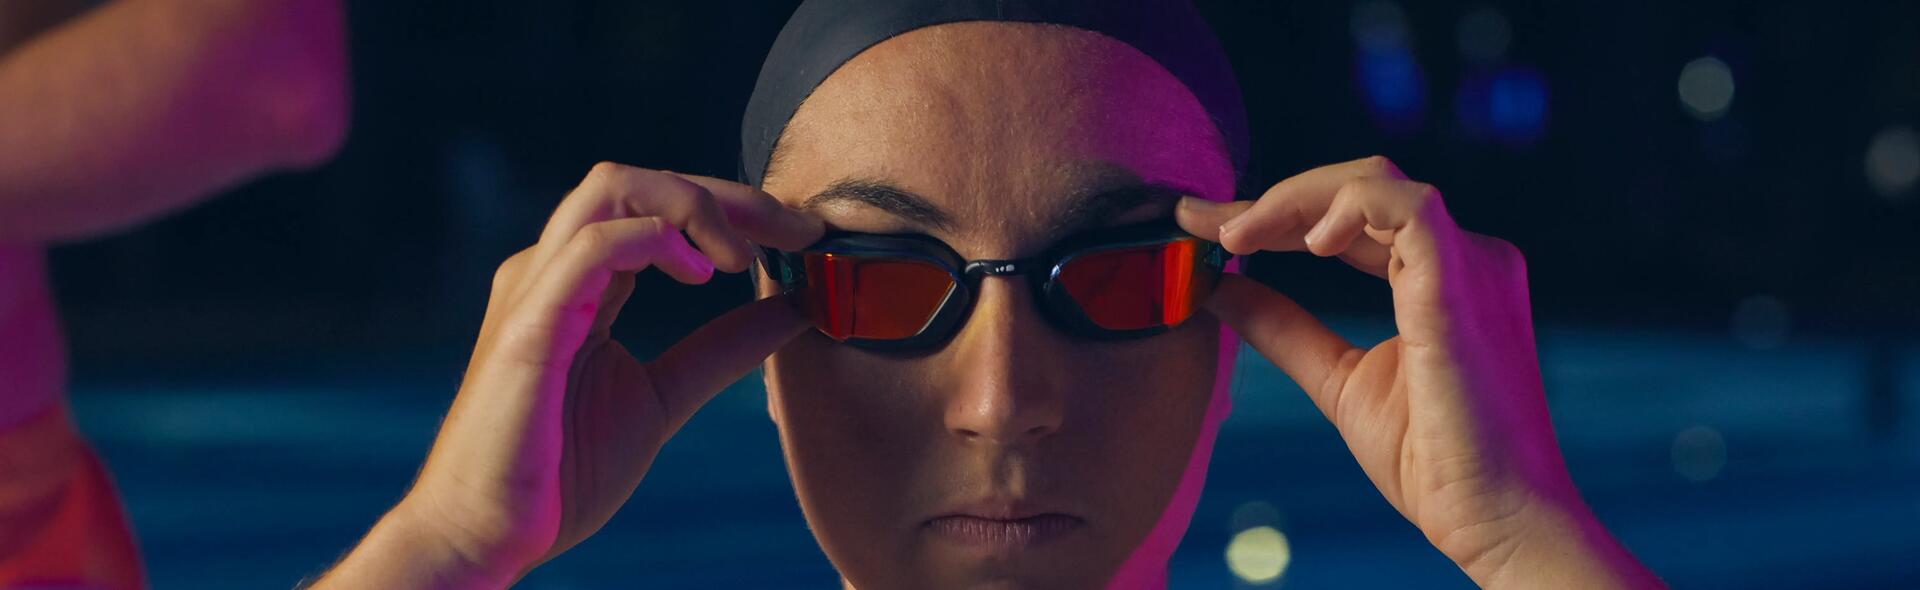 The B-FAST swimming goggles